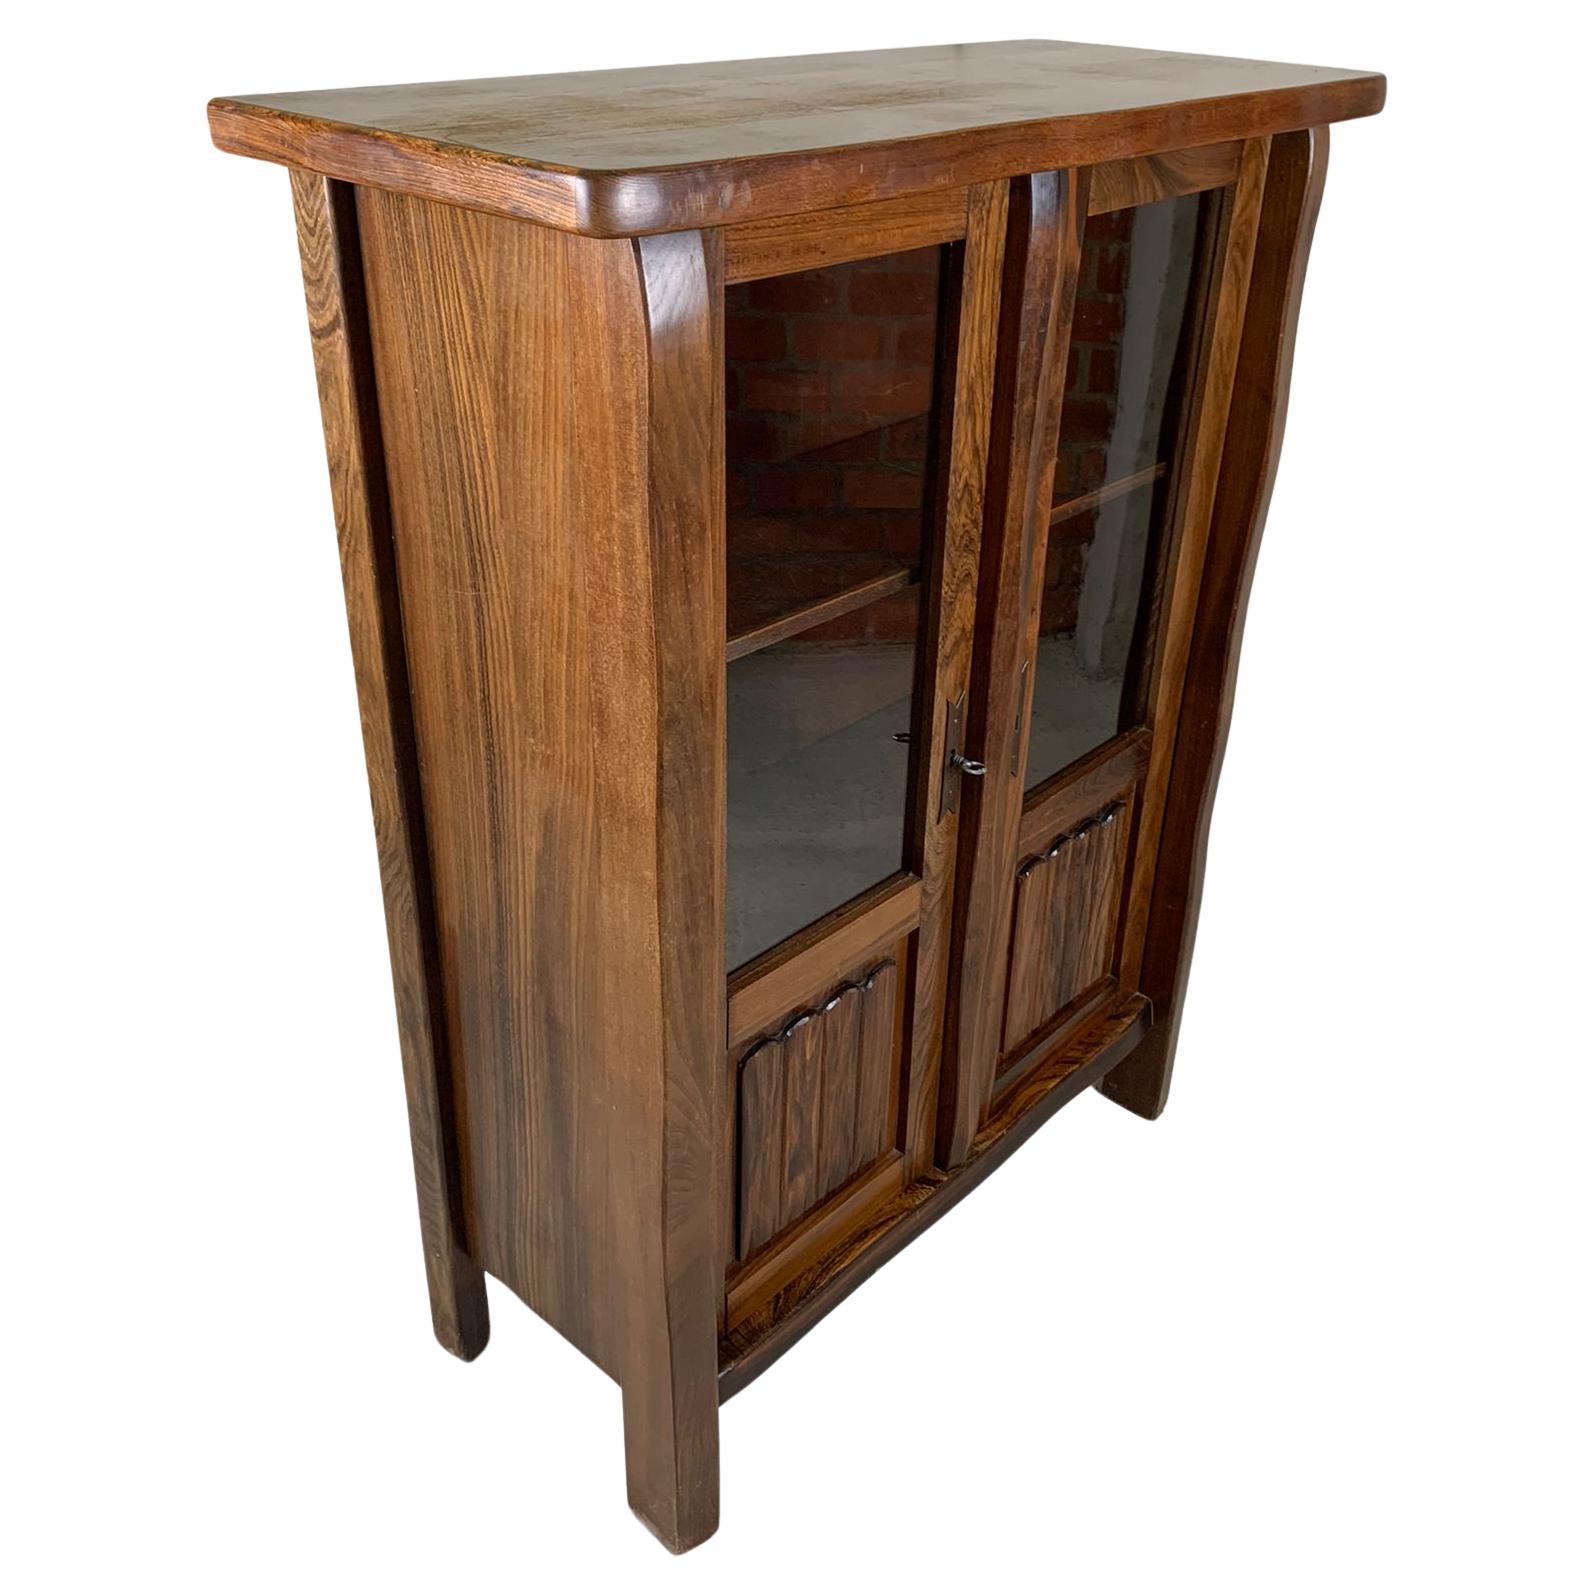 Folk-art Cabinet in solid elm designed by Olavi Hanninen, Finland. The elm shows a rich grain giving this item tons of character. The two door panels are provided with a glass window, therefore it can also be used as show case or dry bar. Both doors